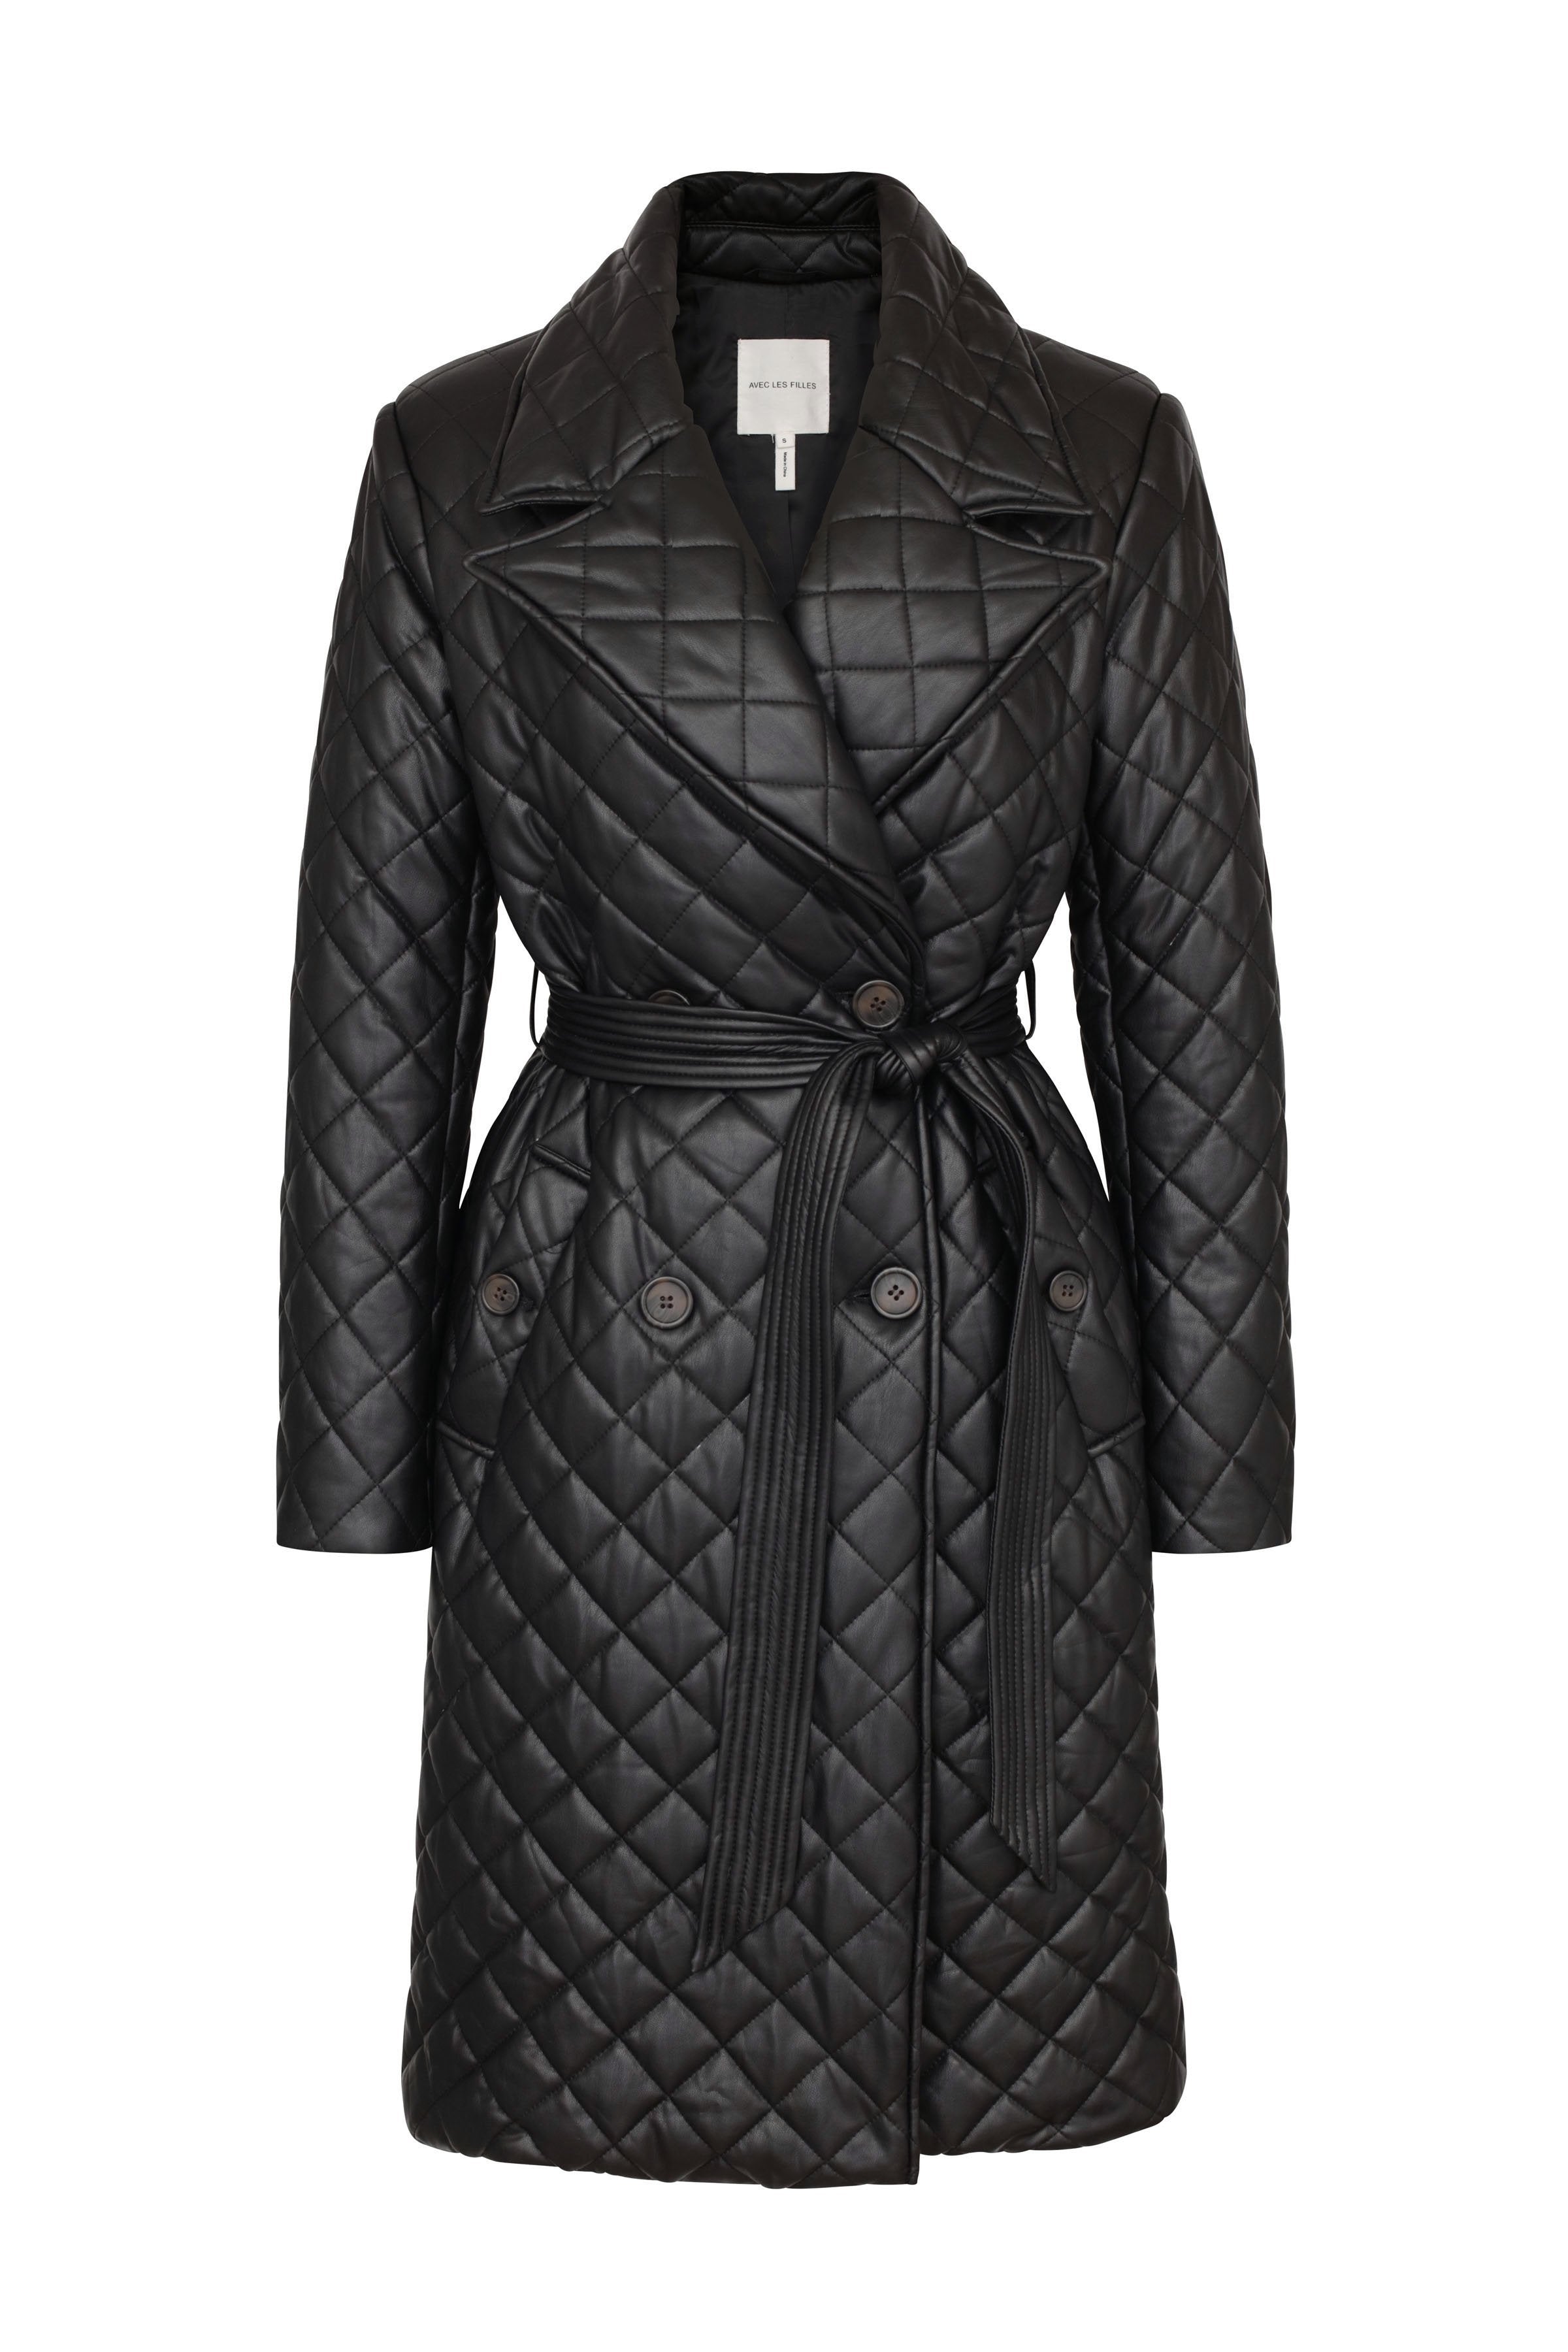 Diamond Quilted Faux Leather Trench